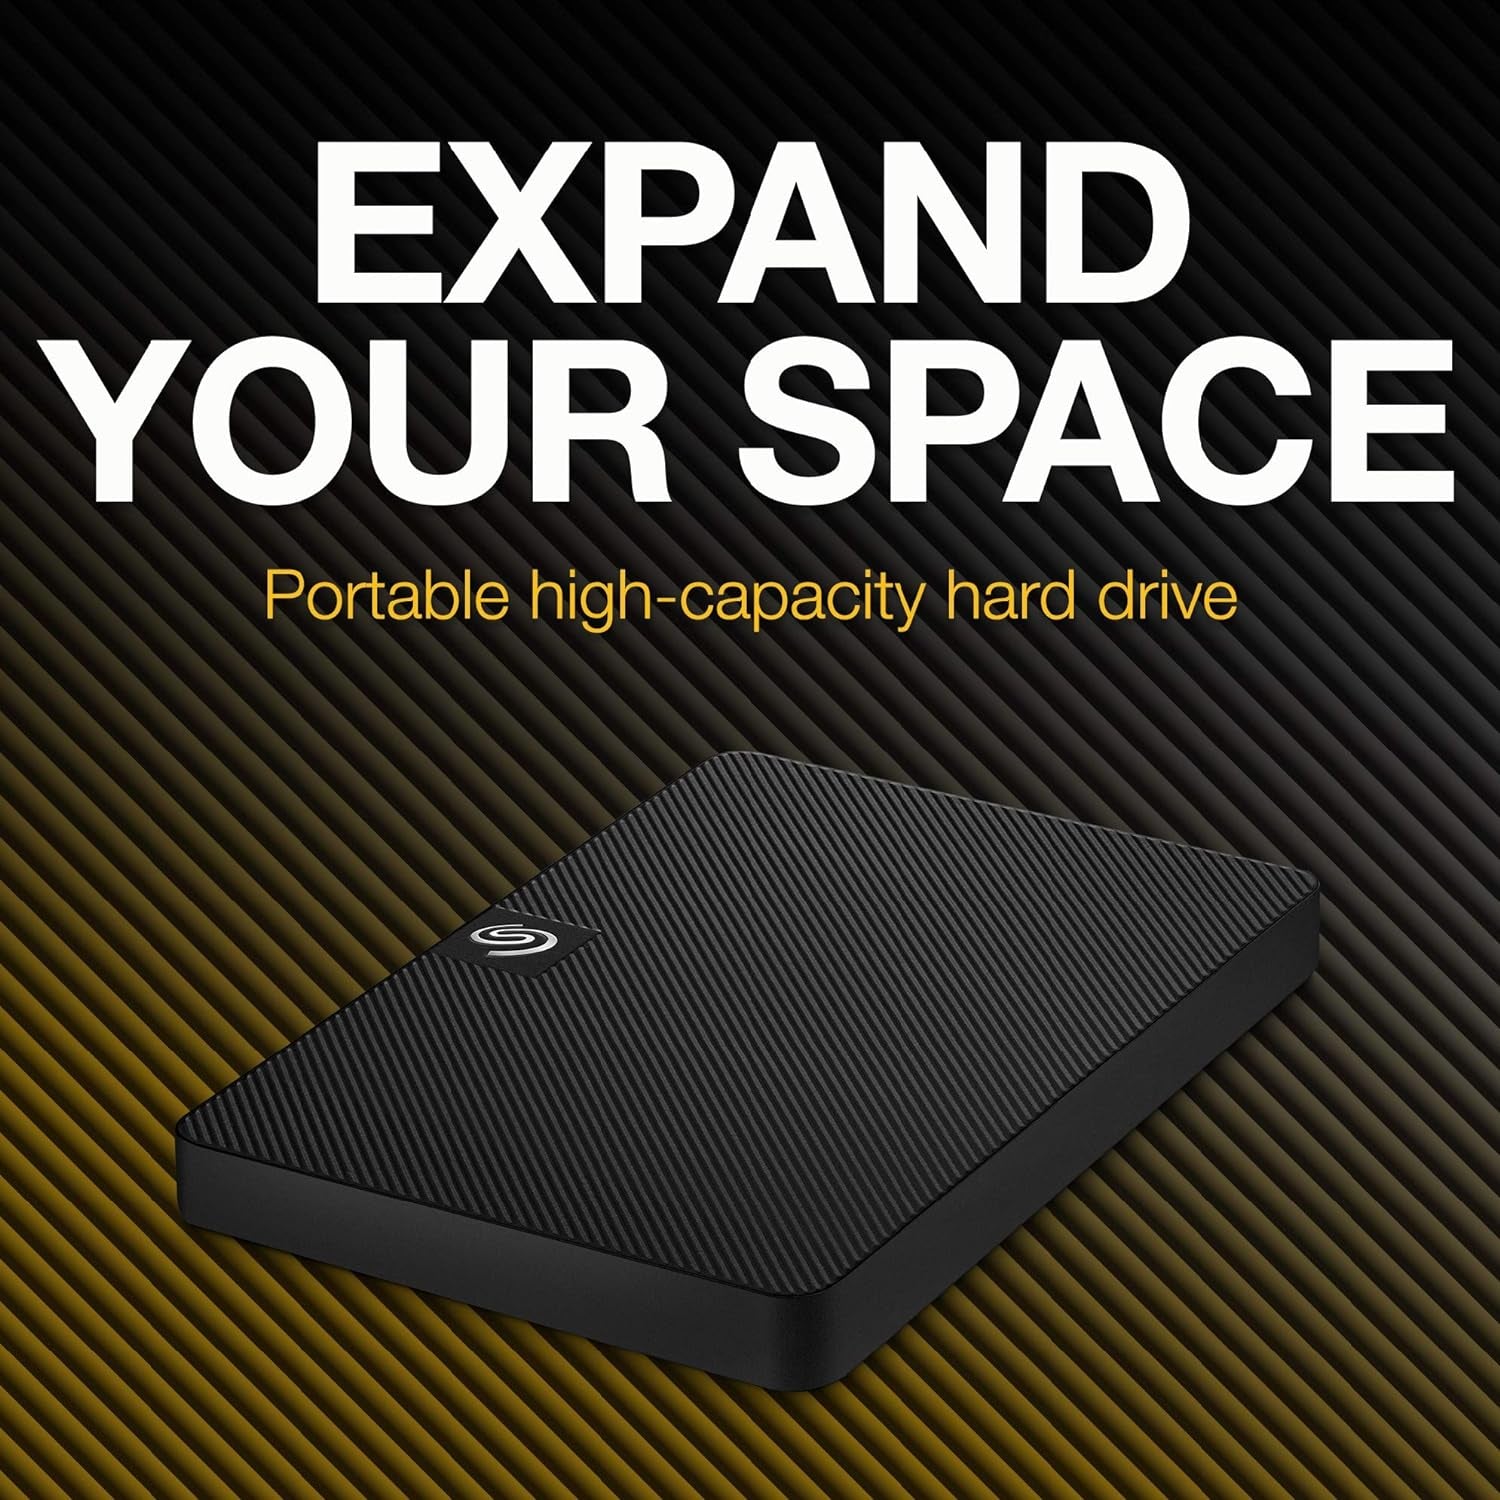 Expansion Portable, 2TB, External Hard Drive, 2.5 Inch, USB 3.0, for Mac and PC, 2 Year Rescue Services (STKM2000400)